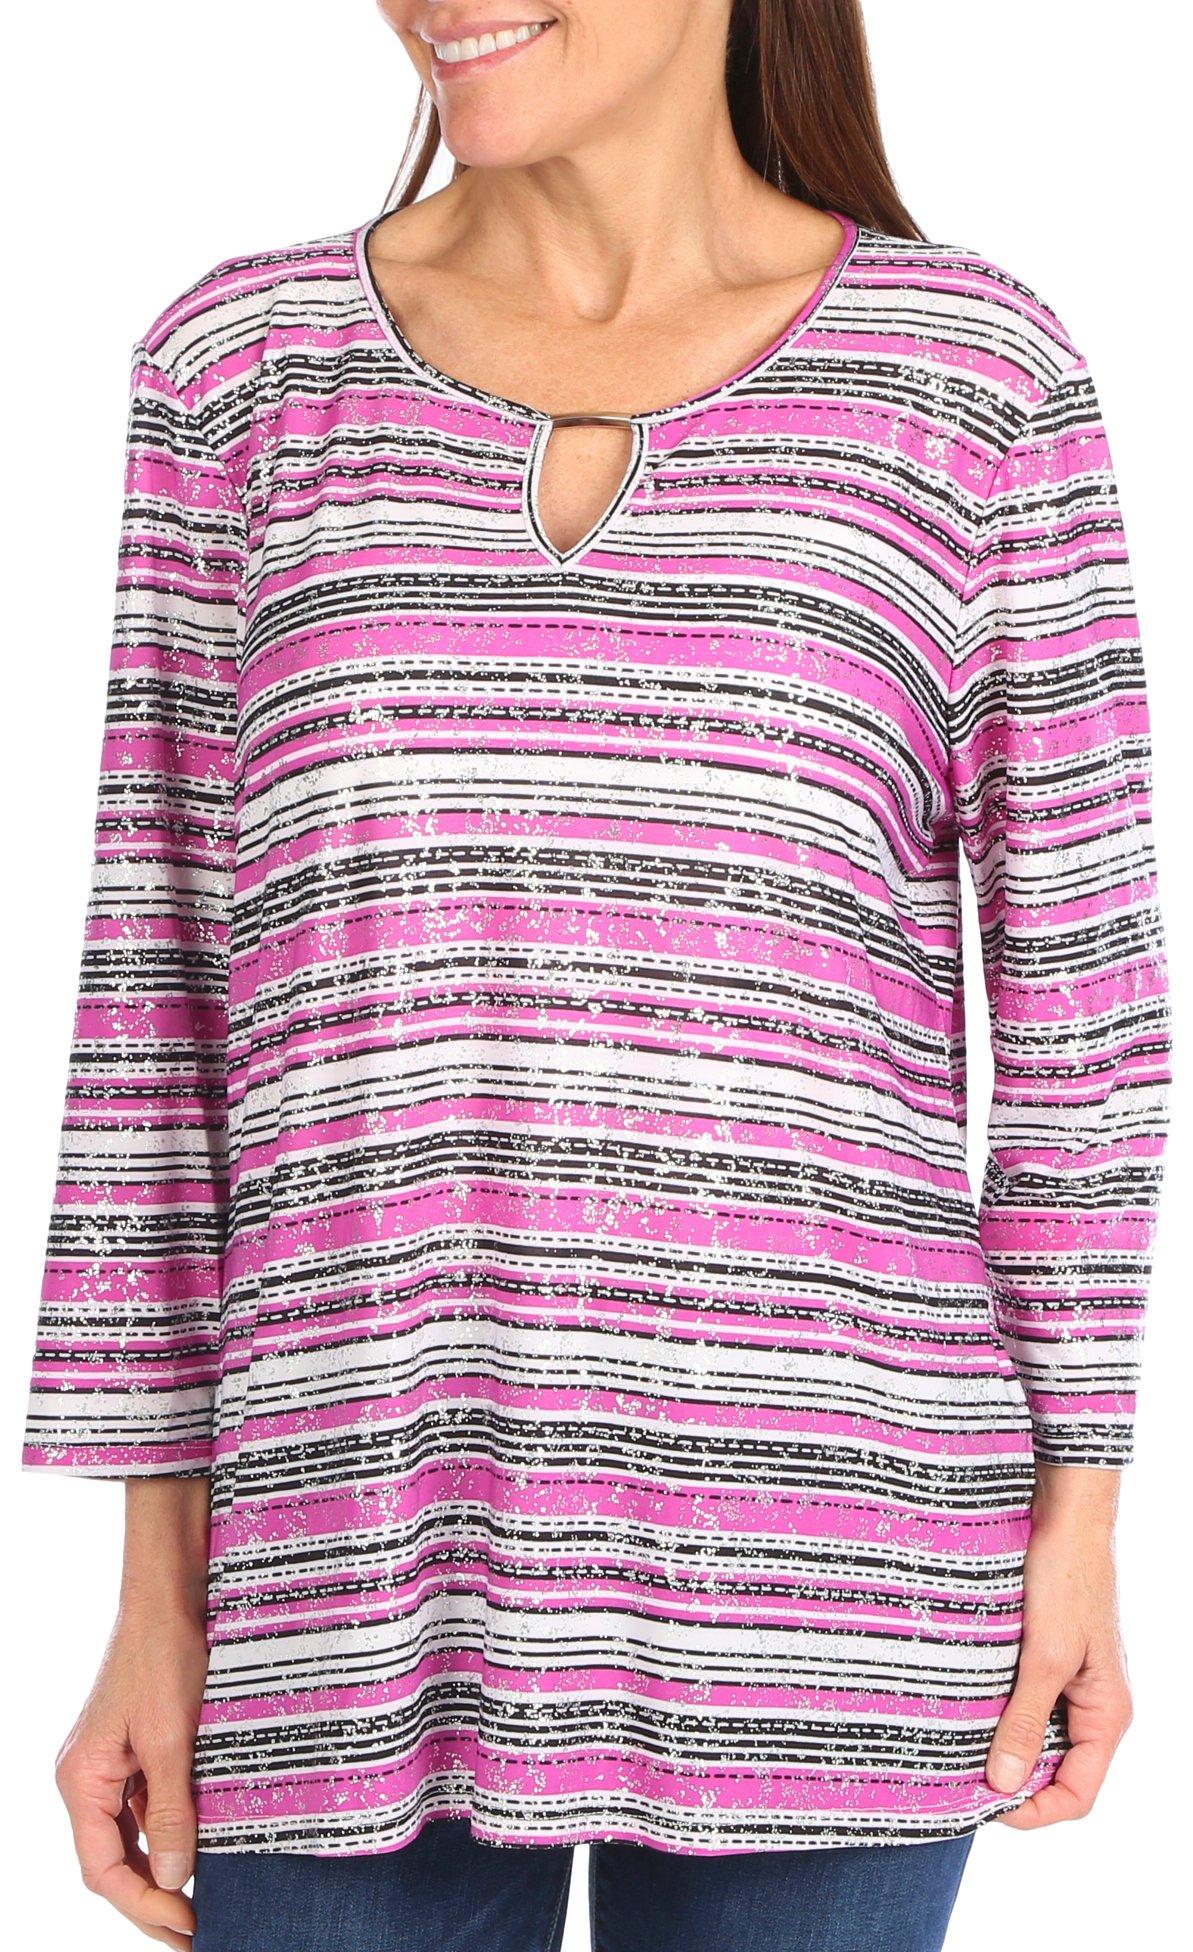 Womens Striped Colorful Top